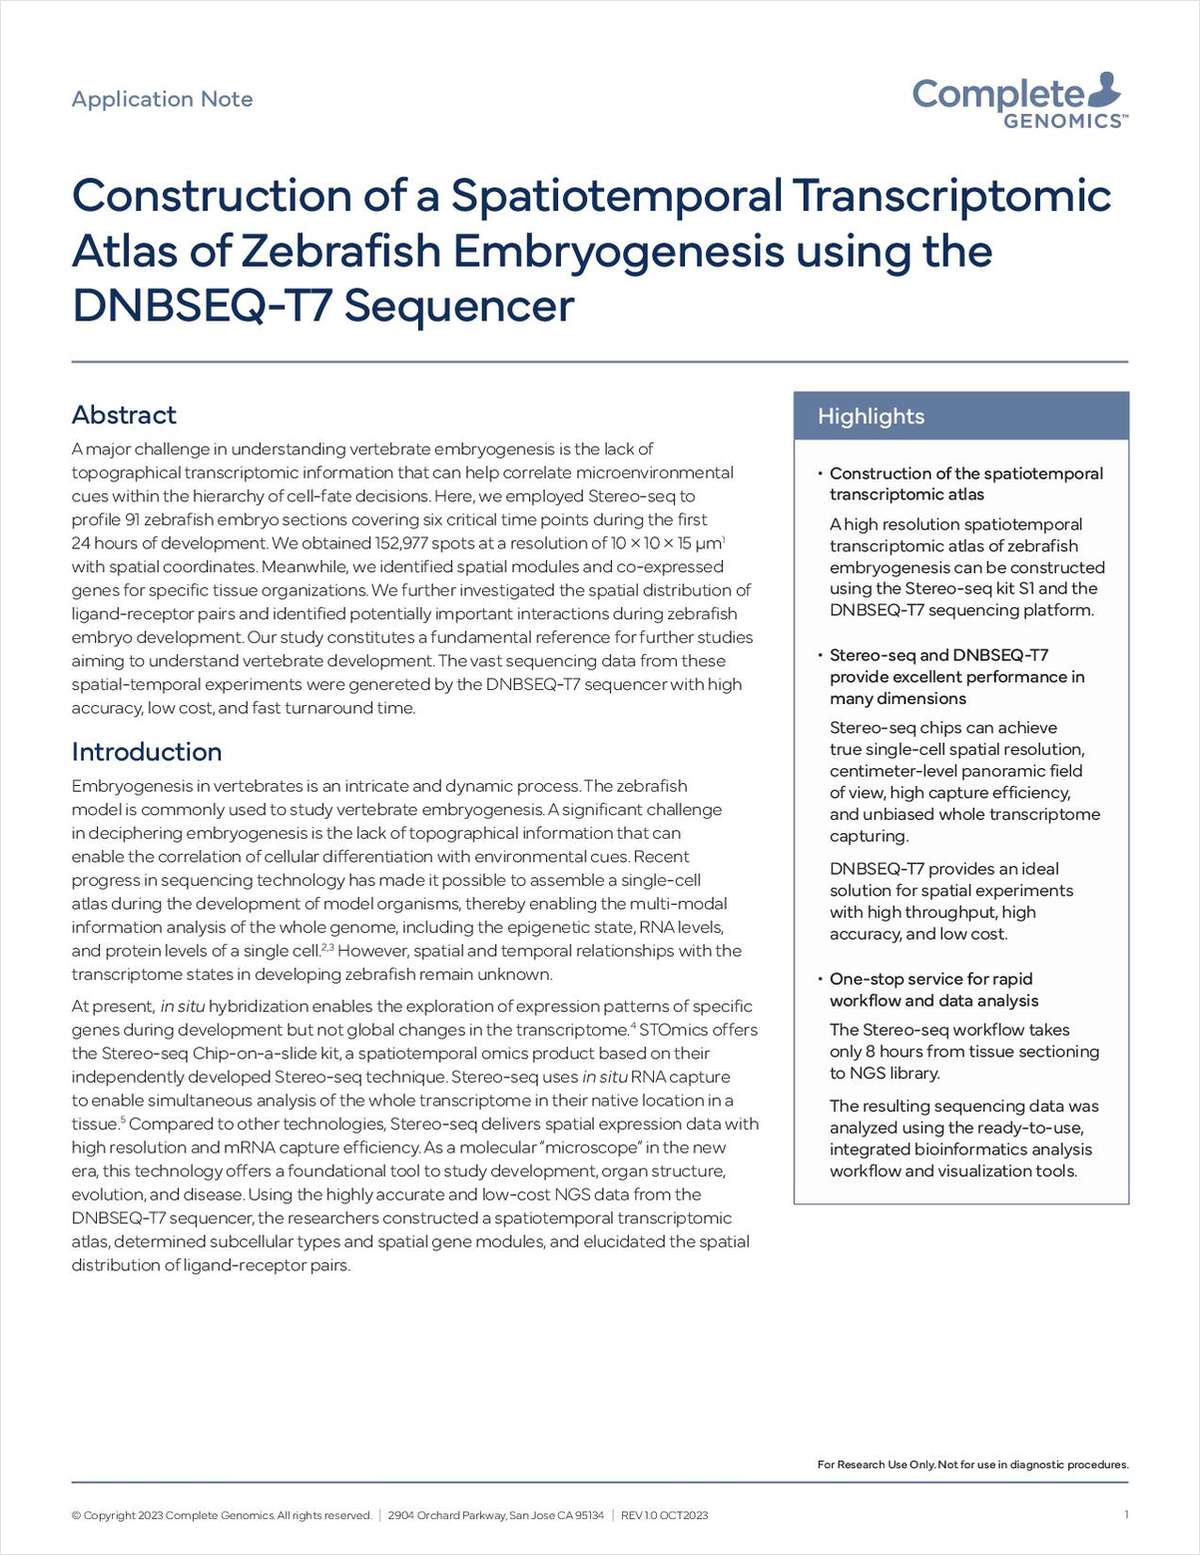 Construction of a Spatiotemporal Transcriptomic Atlas of Zebrafish Embryogenesis Using the DNBSEQ-T7 Sequencer